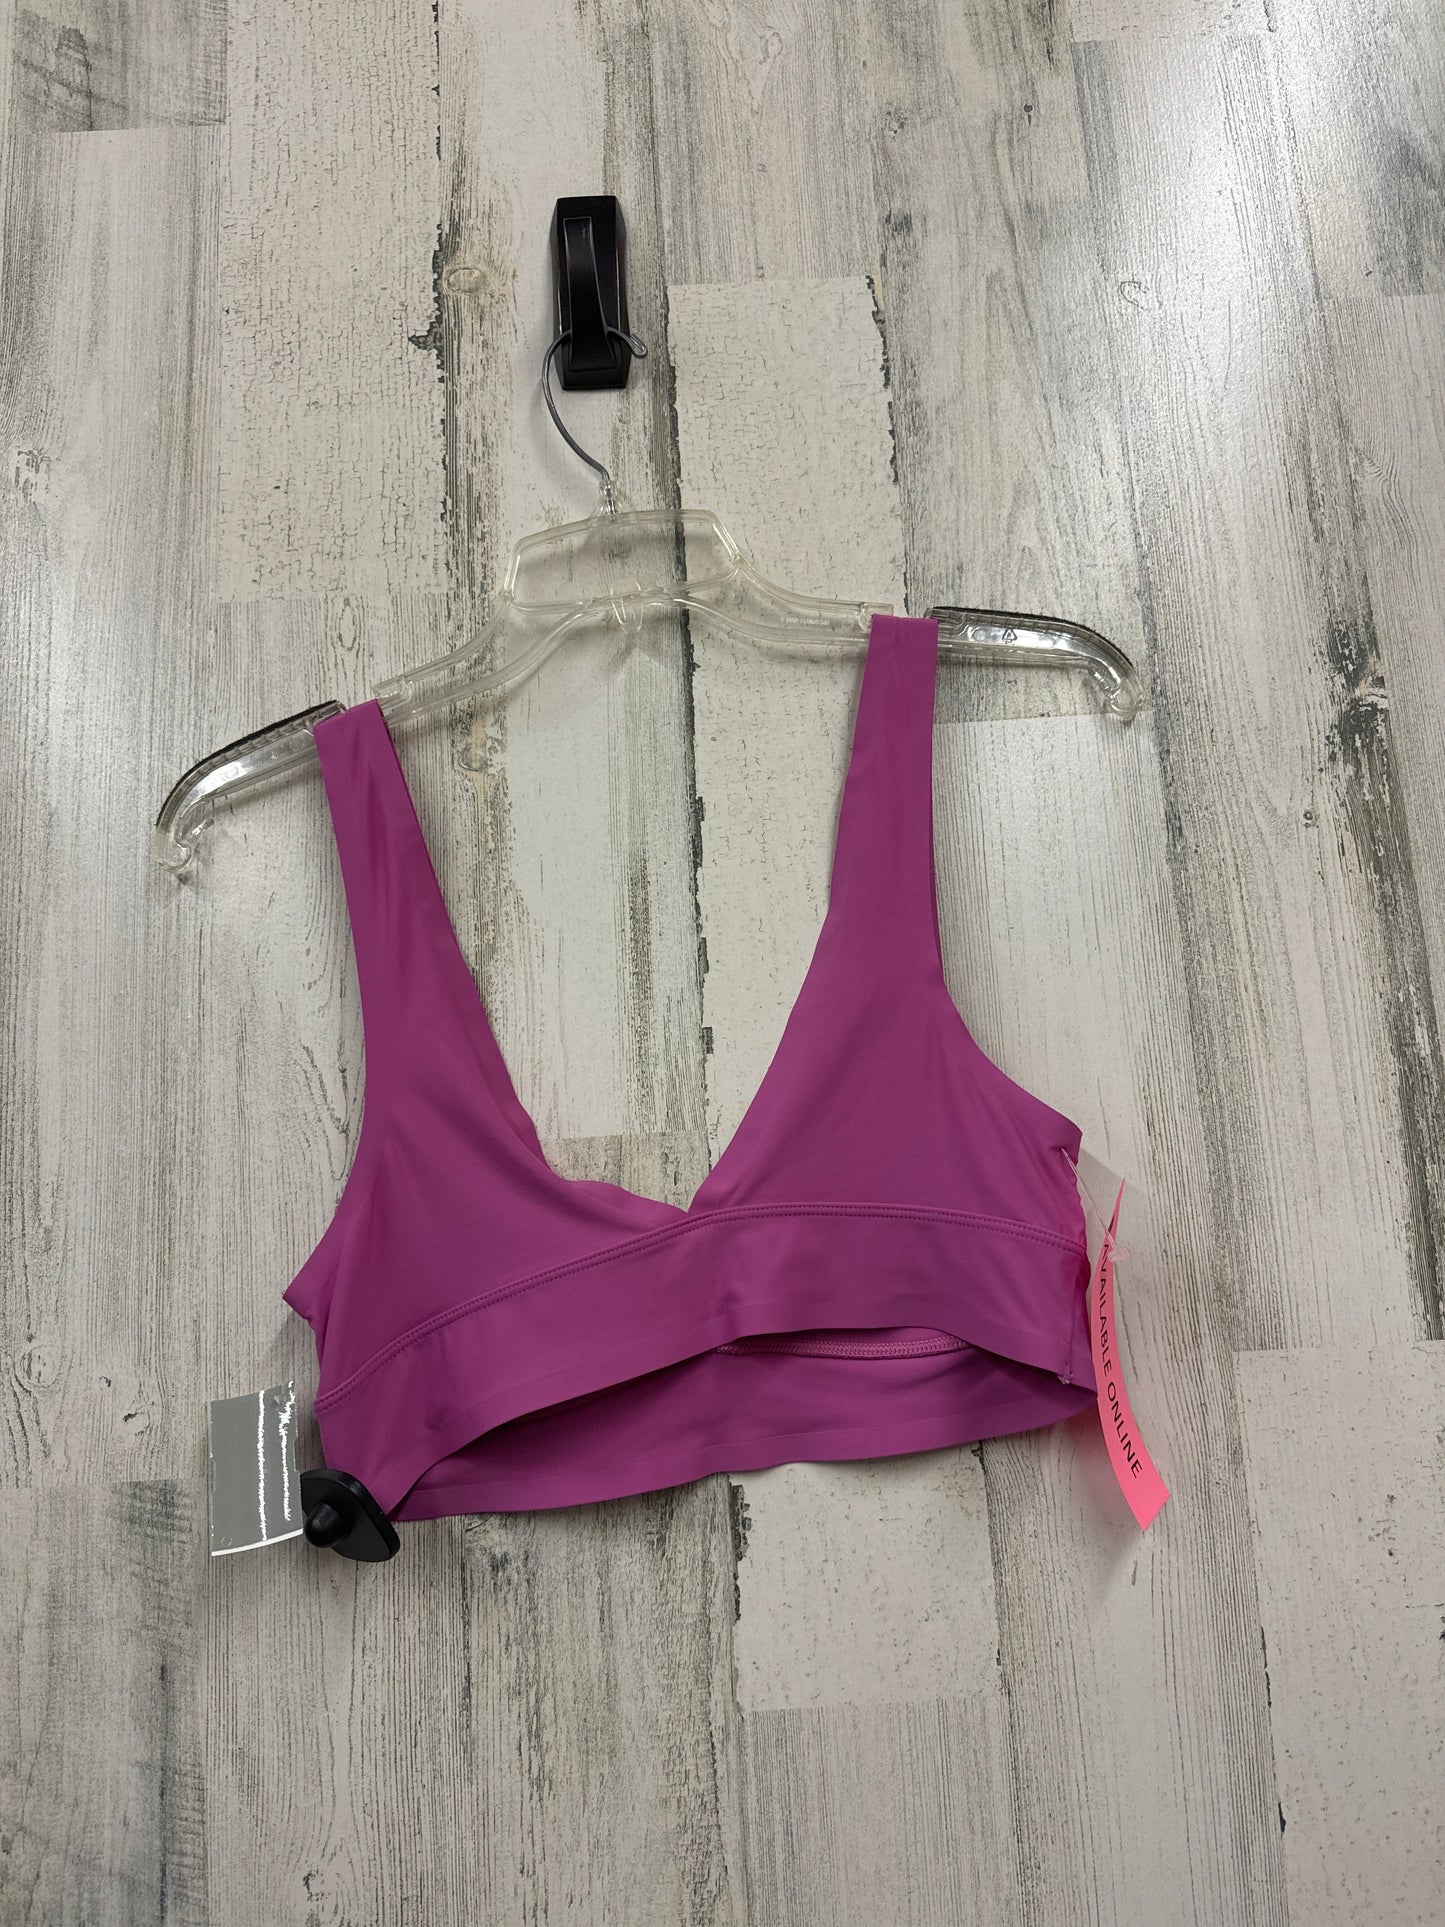 Athletic Bra By Urban Outfitters  Size: M